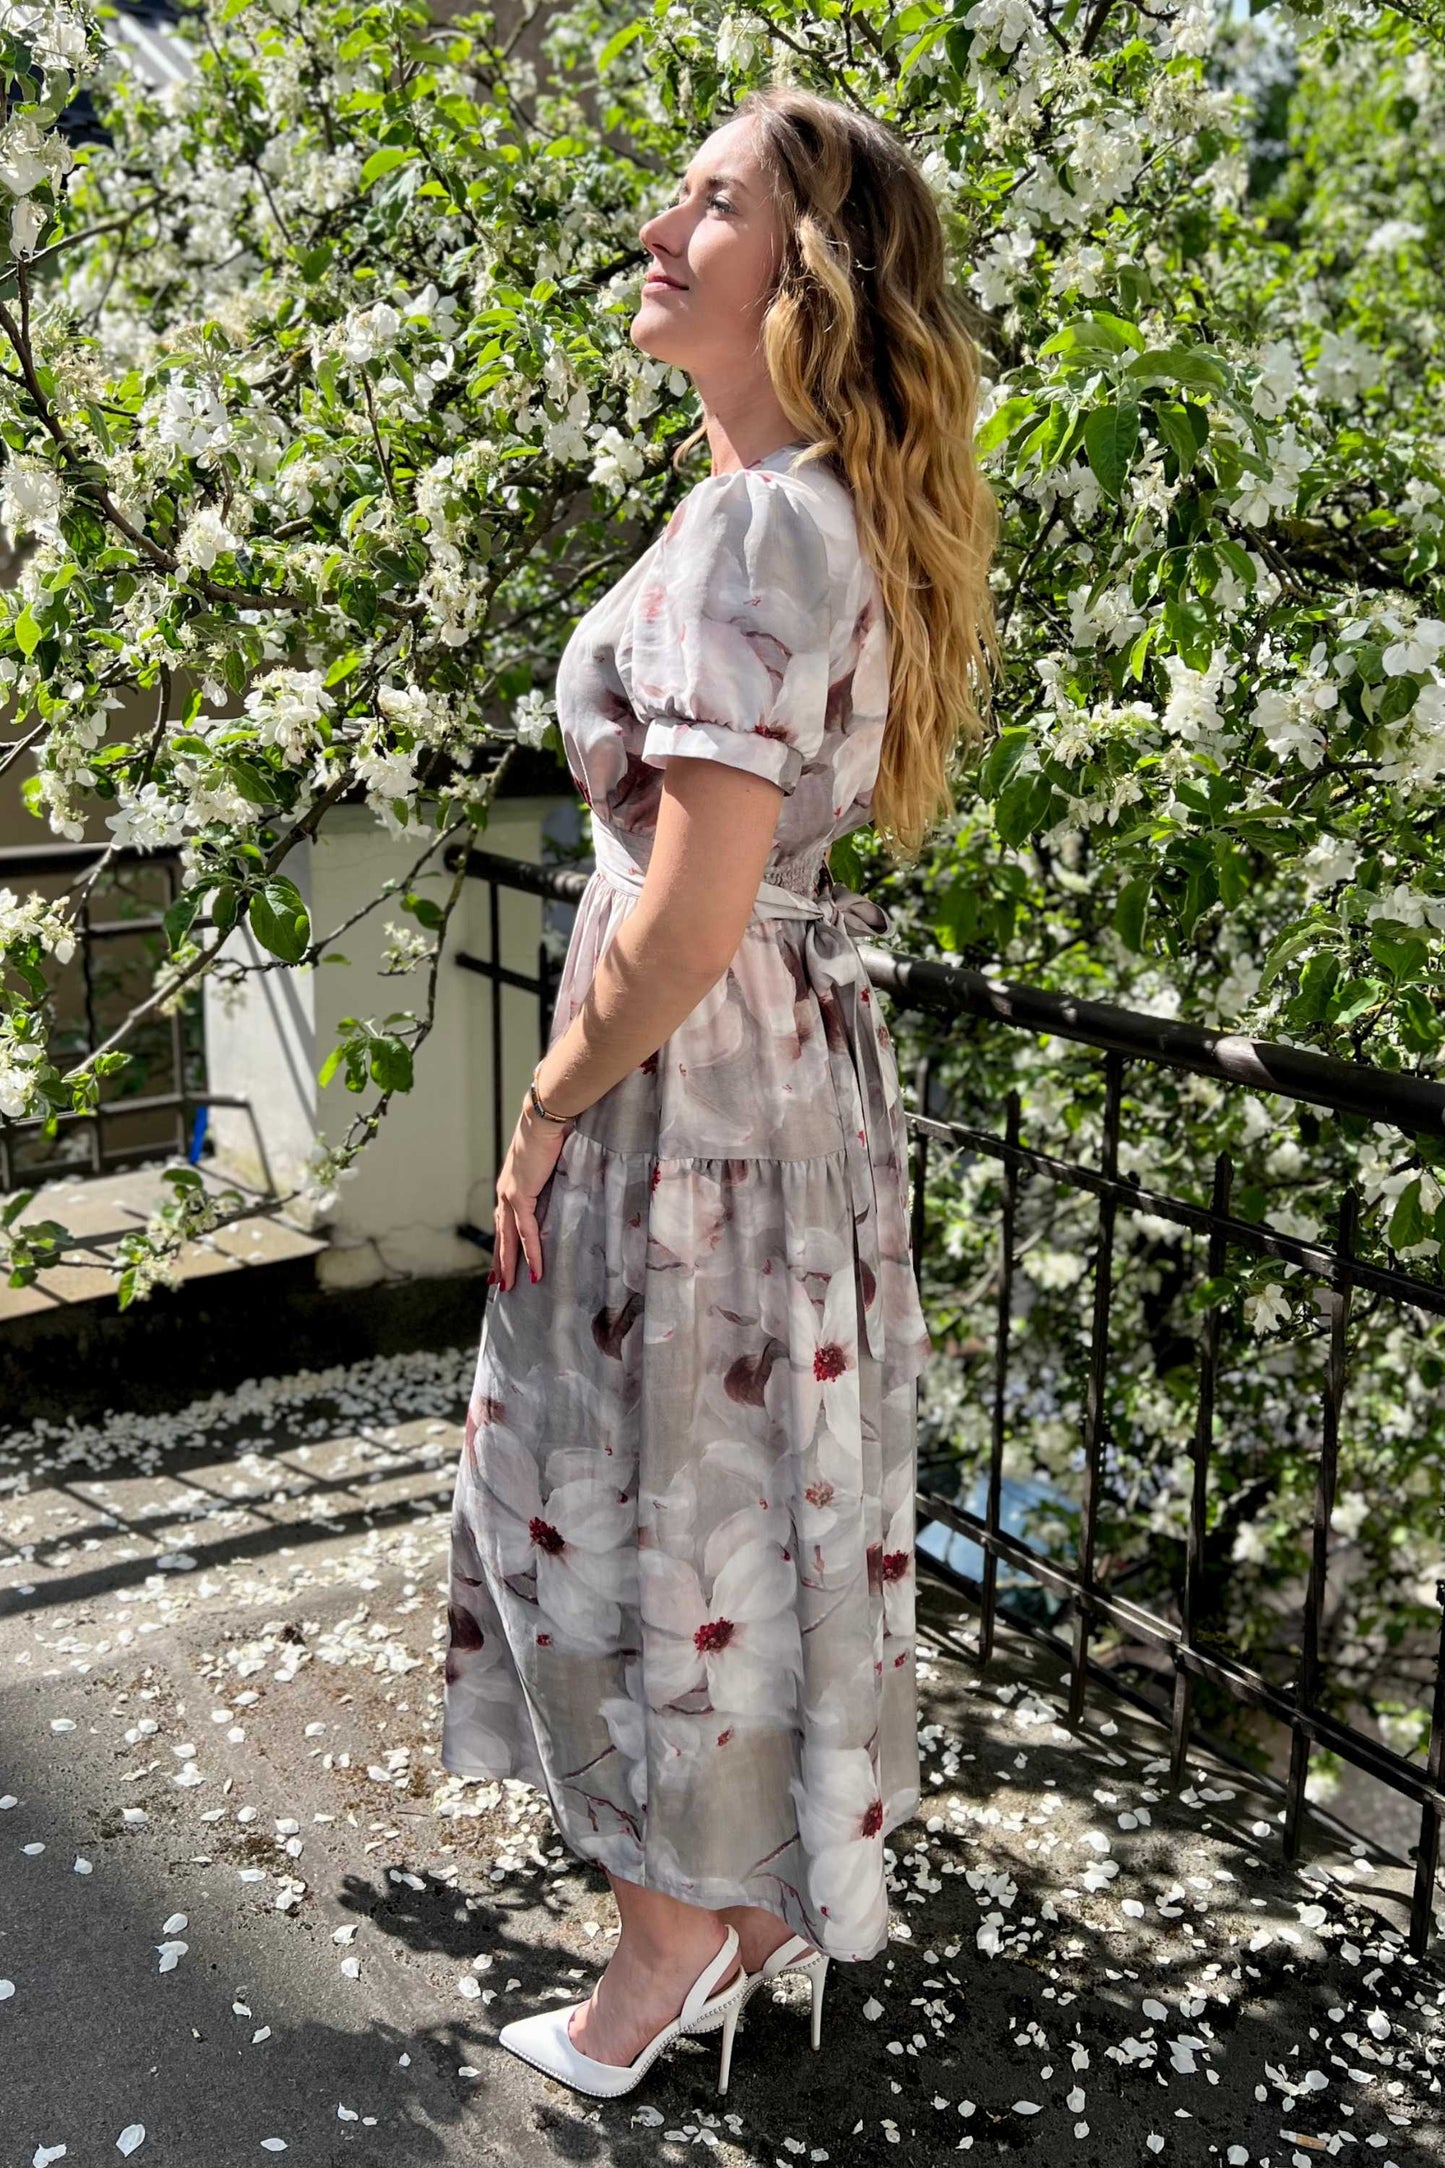 Romantic summer dress with flowers